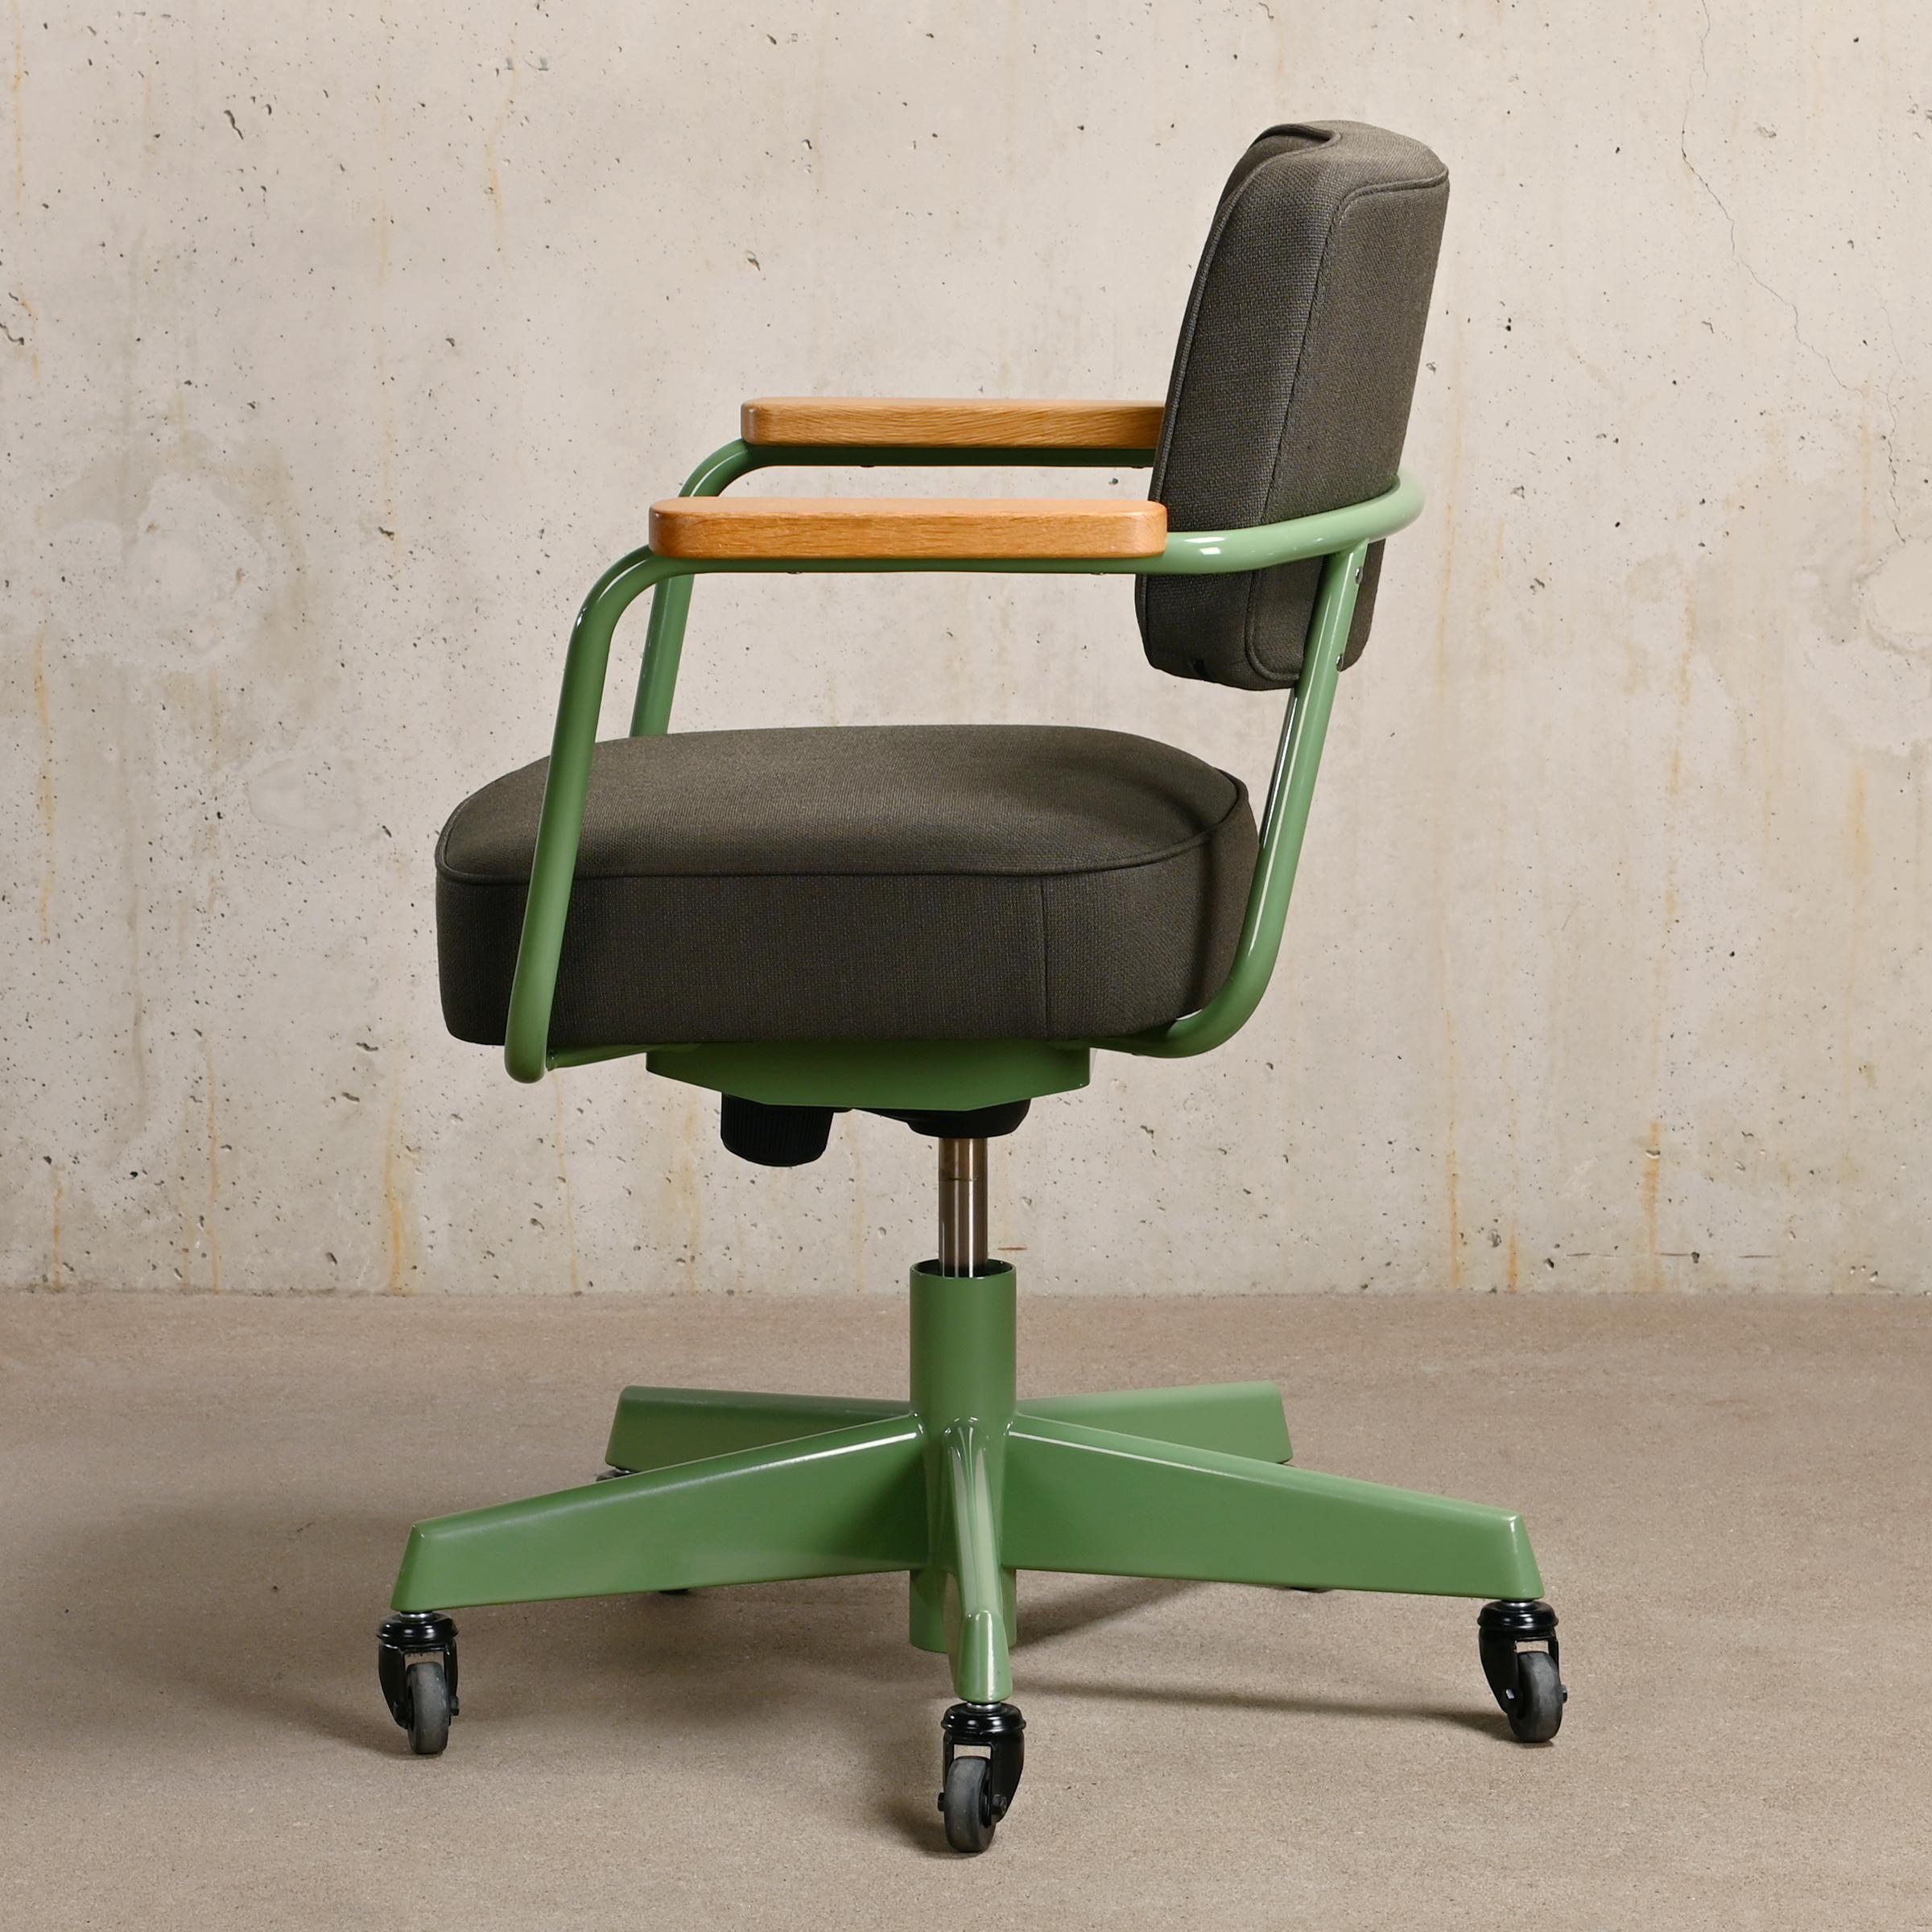 Fauteuil Direction Pivotant was designed by Jean Prouvé in 1951. This office chair was manufactured by Vitra in collaboration with the Prouvé family and Art Directors of G-Star. Together they created a chair that meets current office standards and